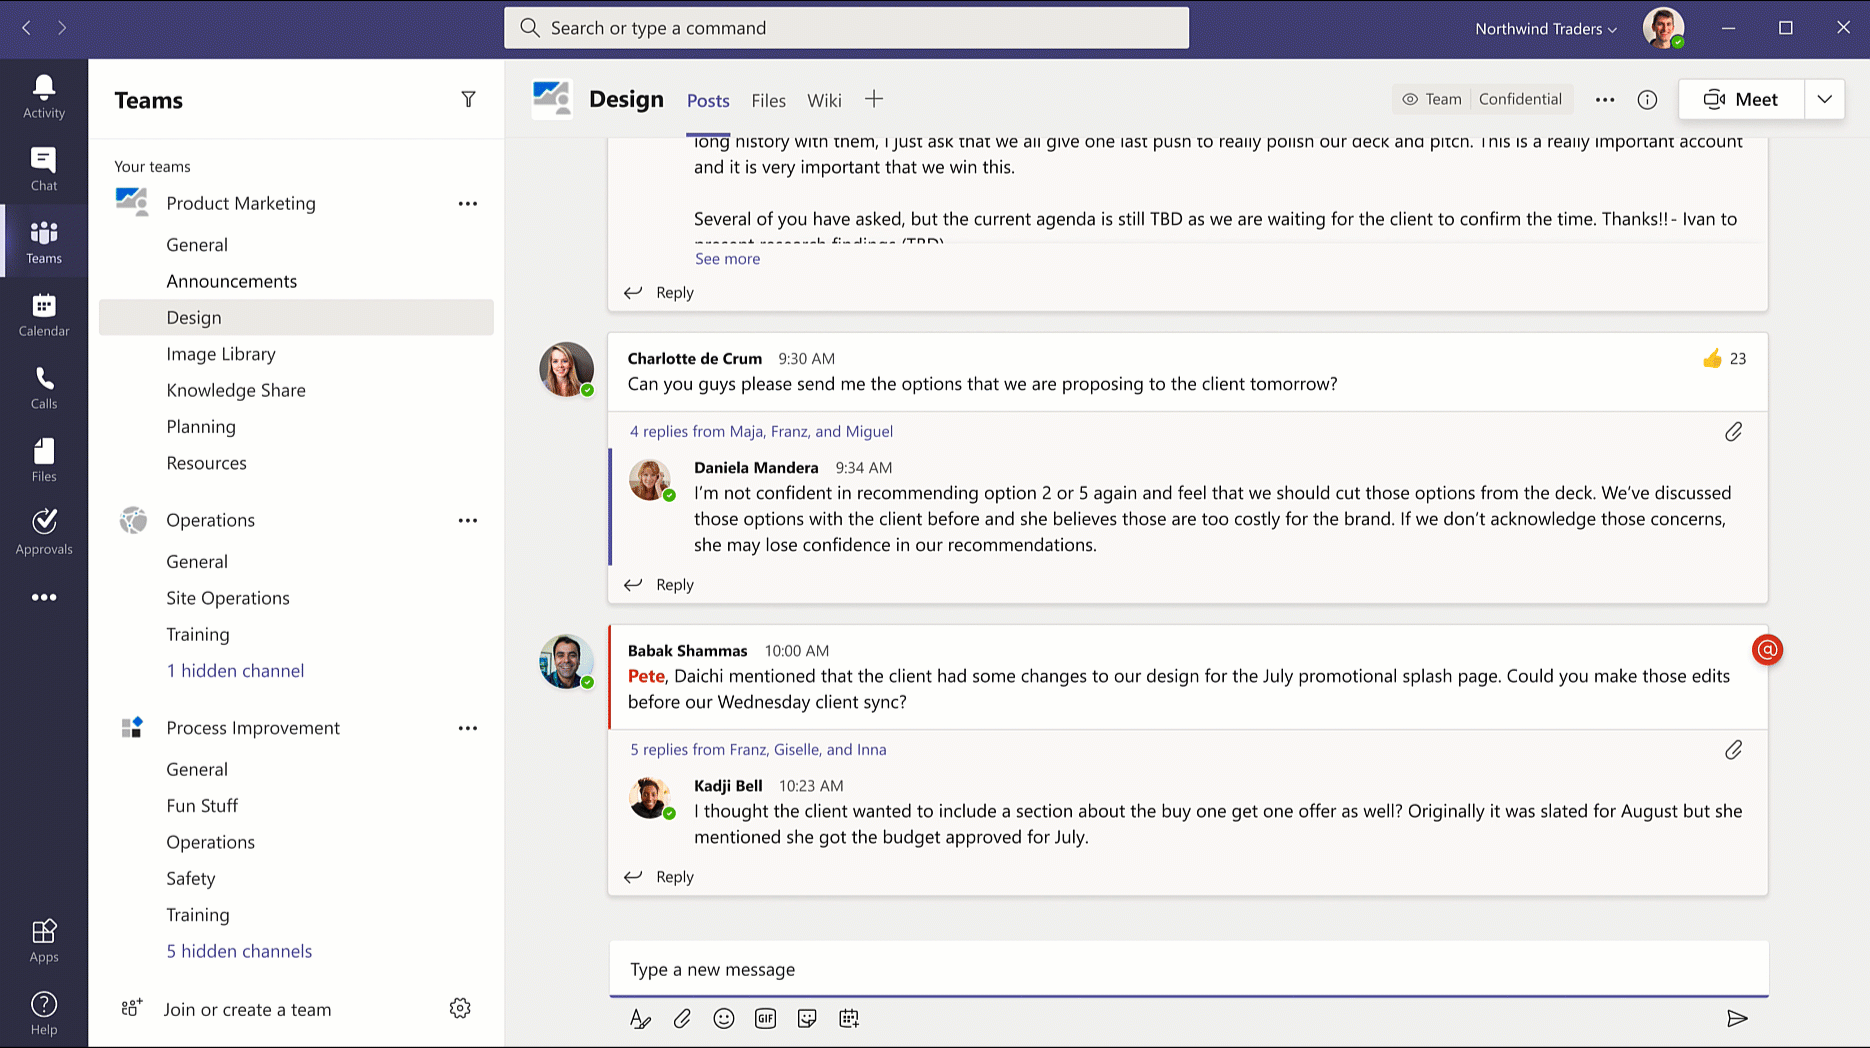 The new Approvals app is now generally available in Microsoft Teams, here's how it works - OnMSFT.com - January 14, 2021